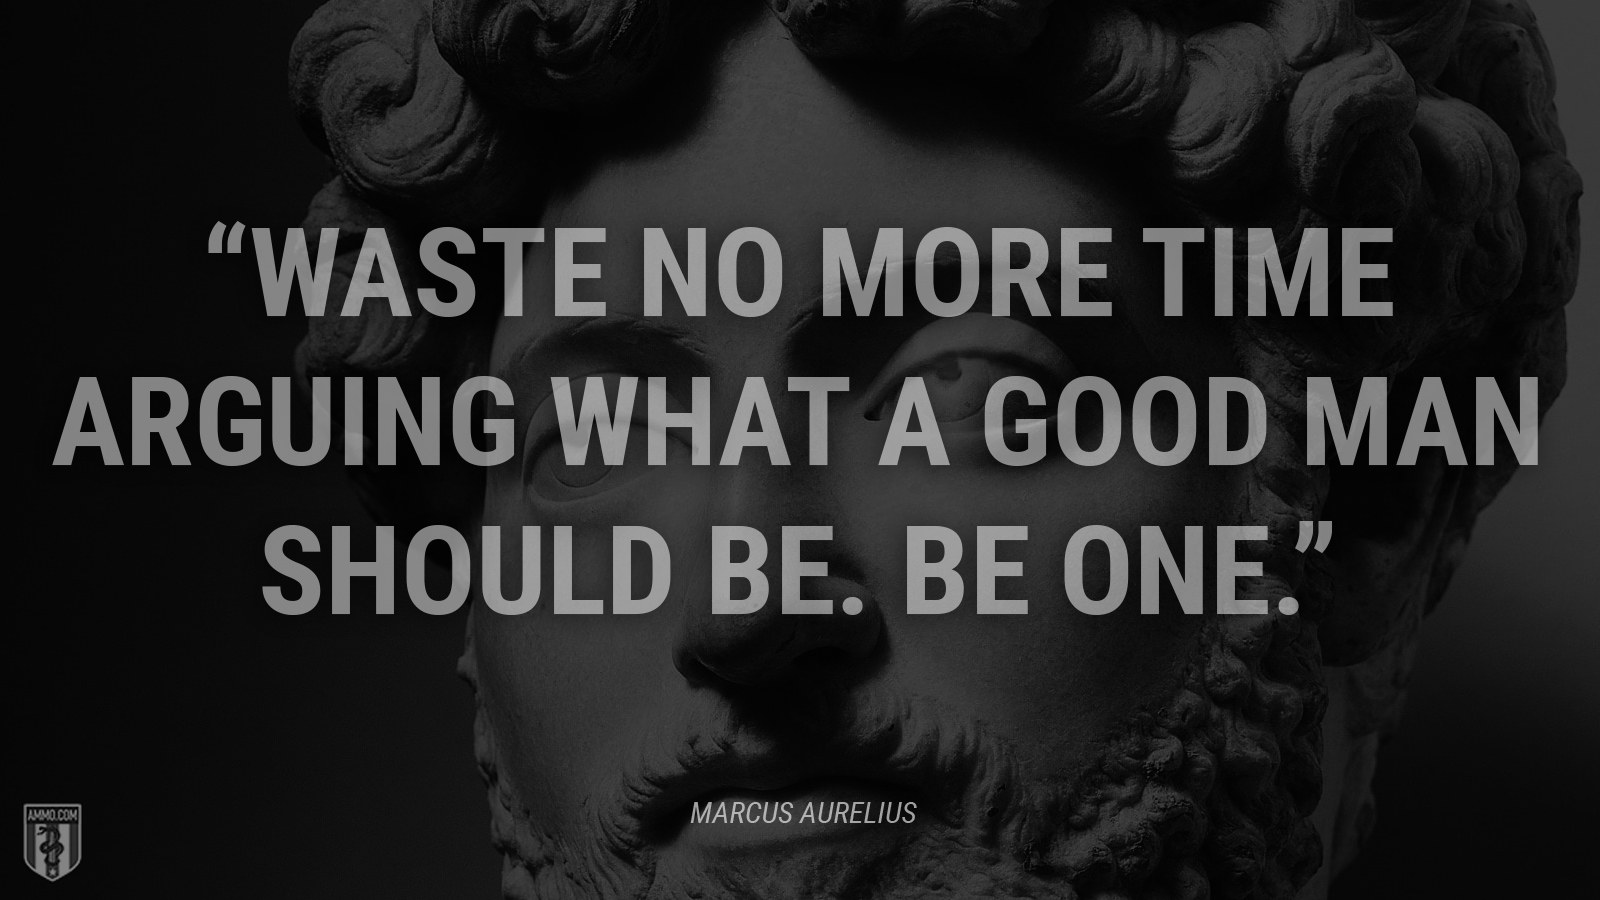 “Waste no more time arguing what a good man should be. Be one.” - Marcus Aurelius